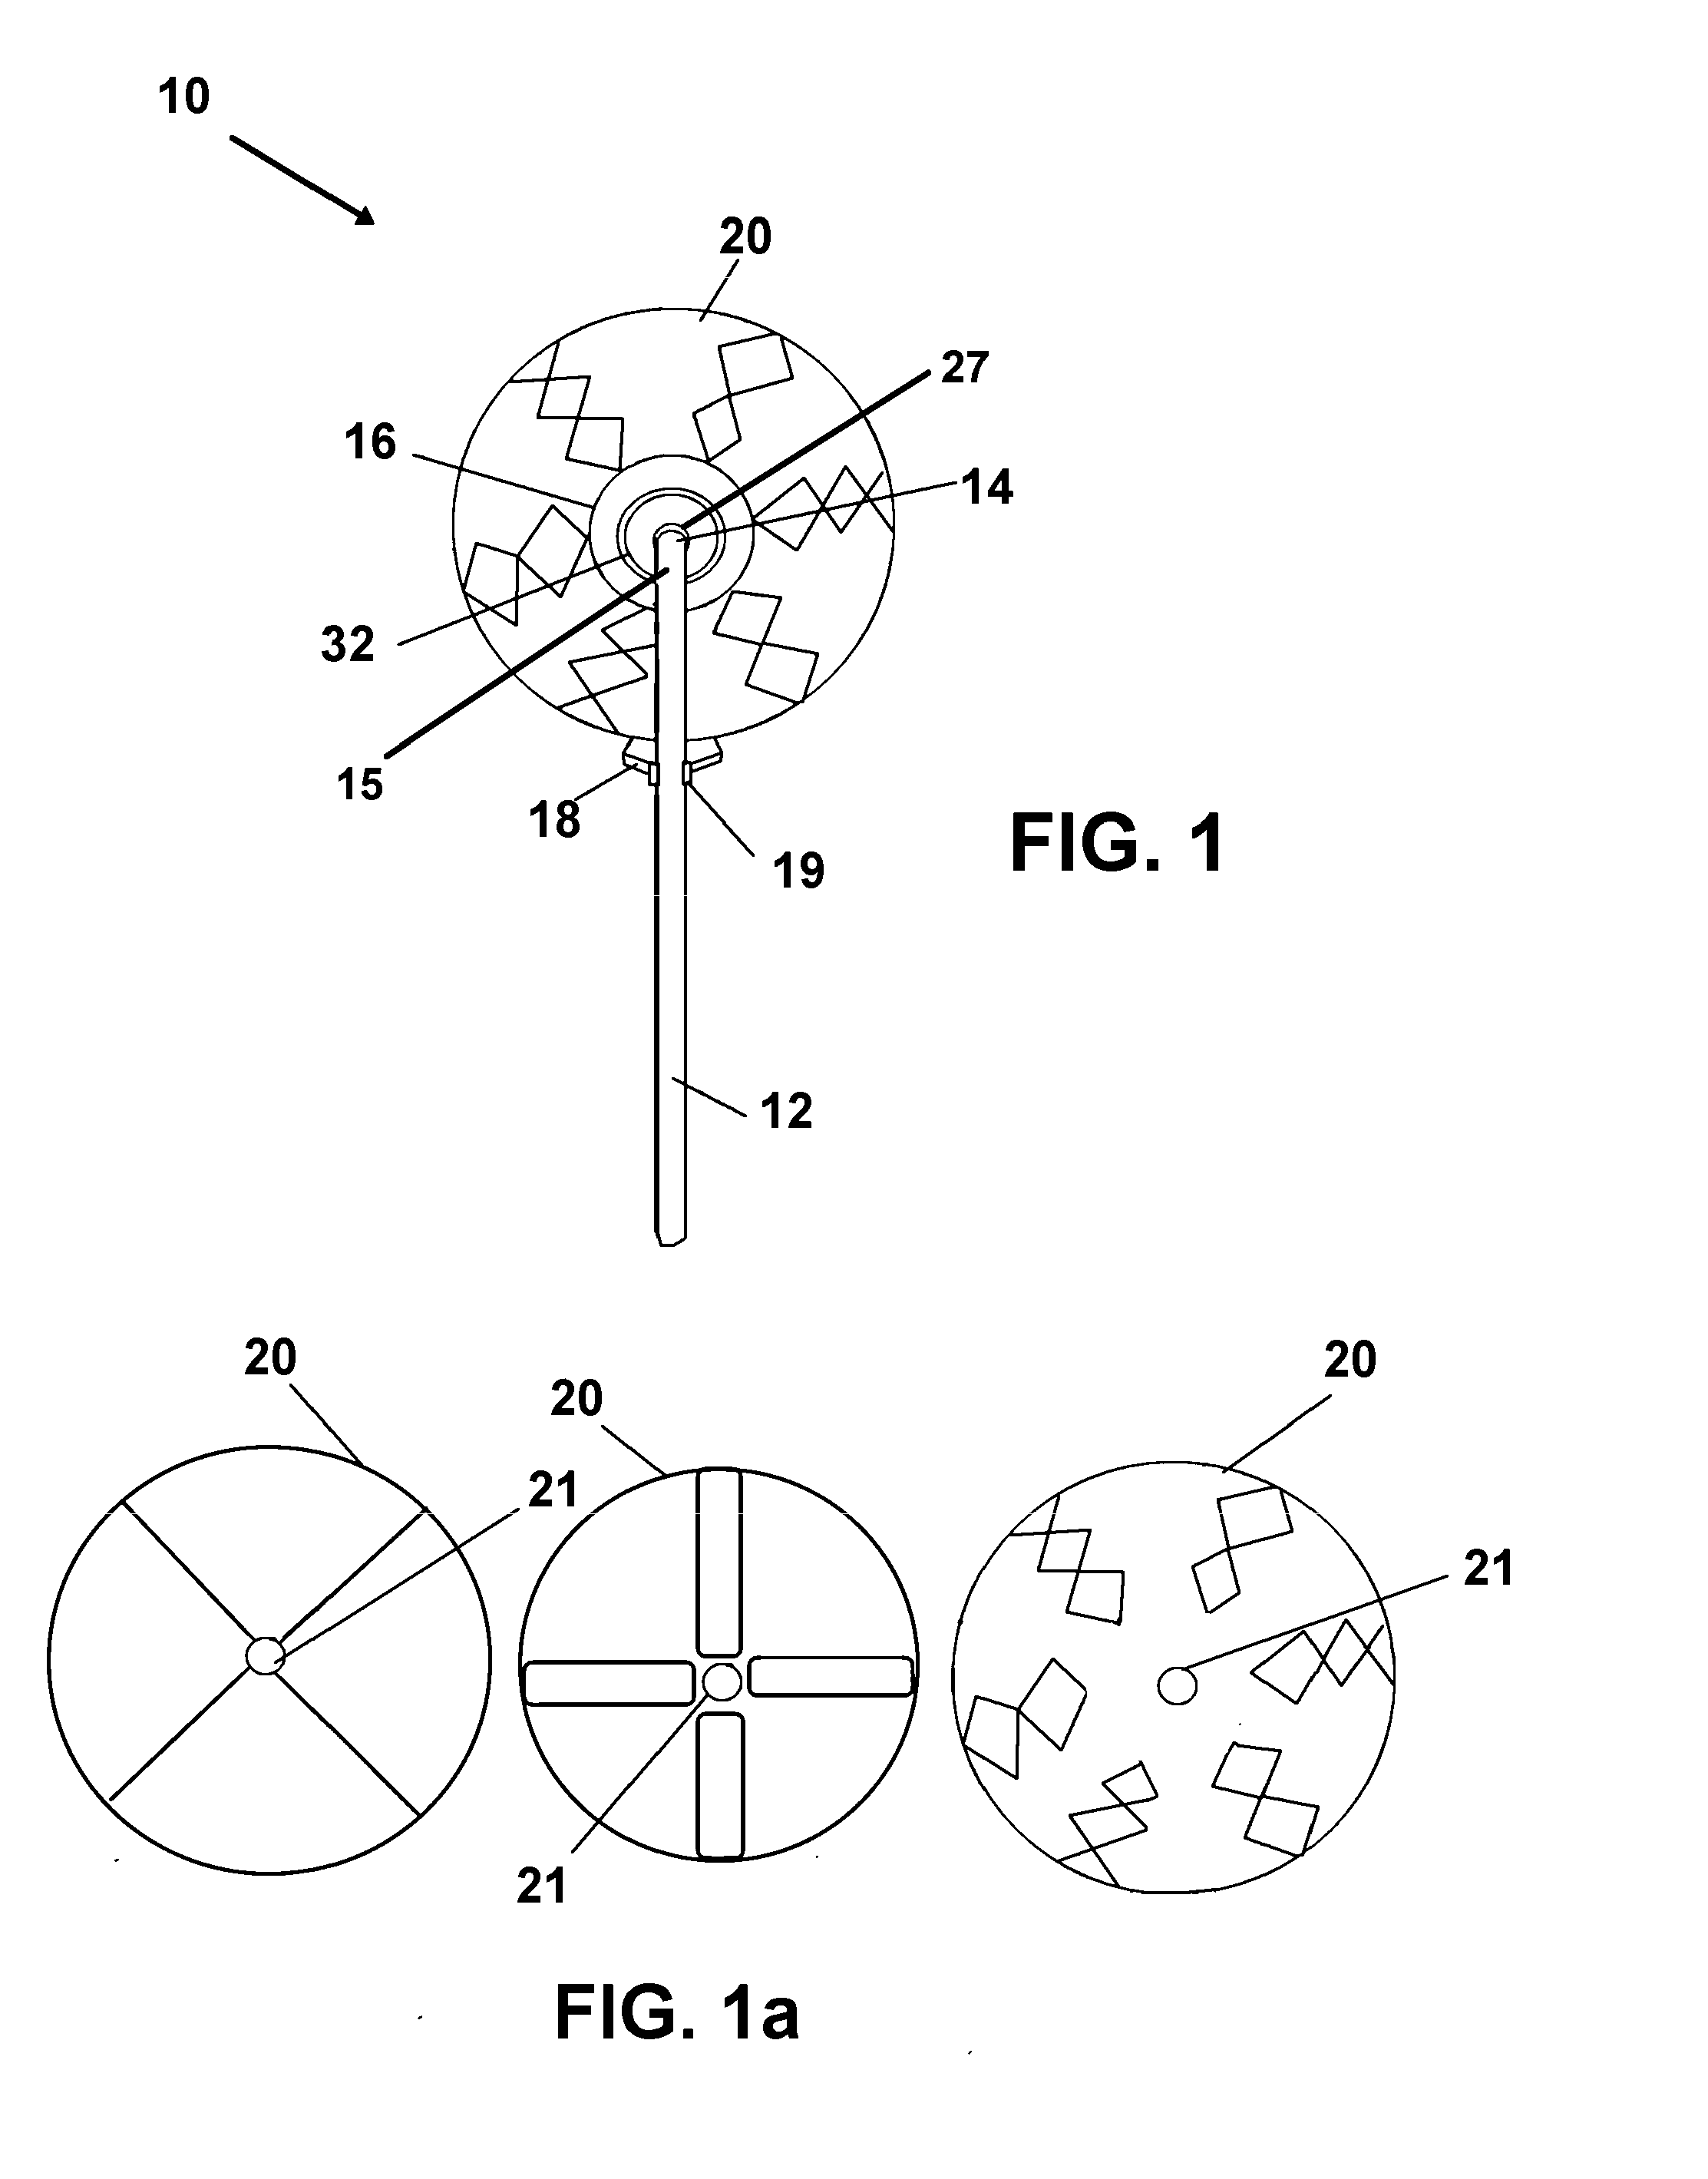 Device and Method for Rotation of Confectionery